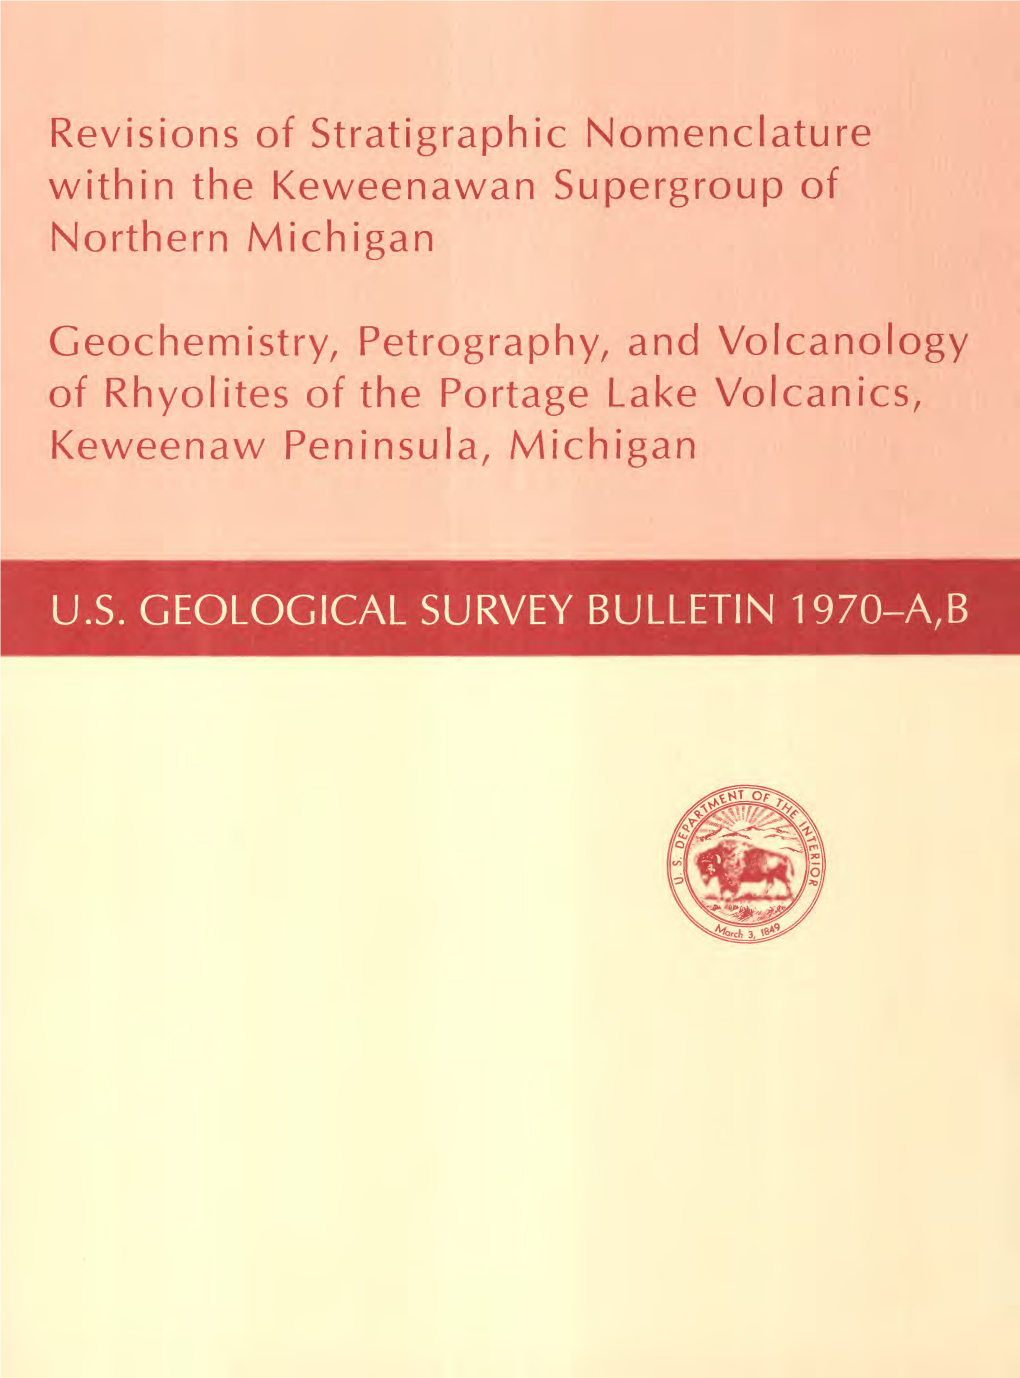 Revisions of Stratigraphic Nomenclature Within the Keweenawan Supergroup of Northern Michigan